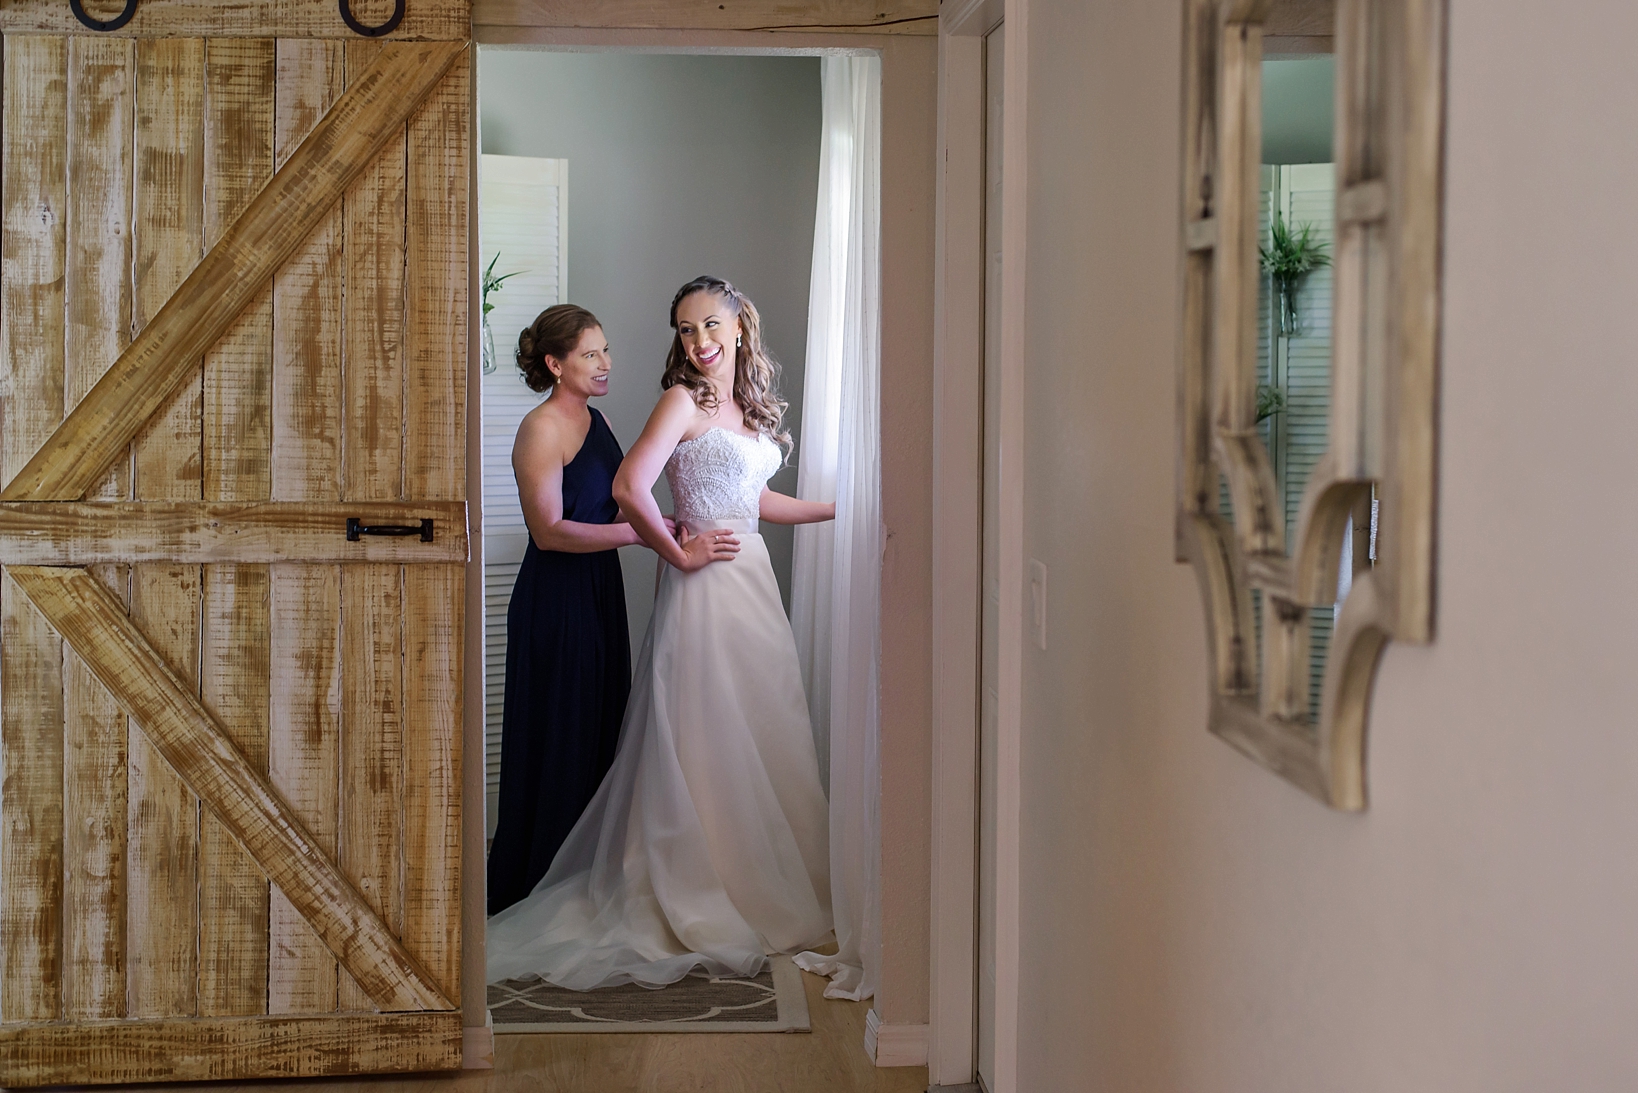 Bride being zipped into her dress by a bridesmaid inside a barn door